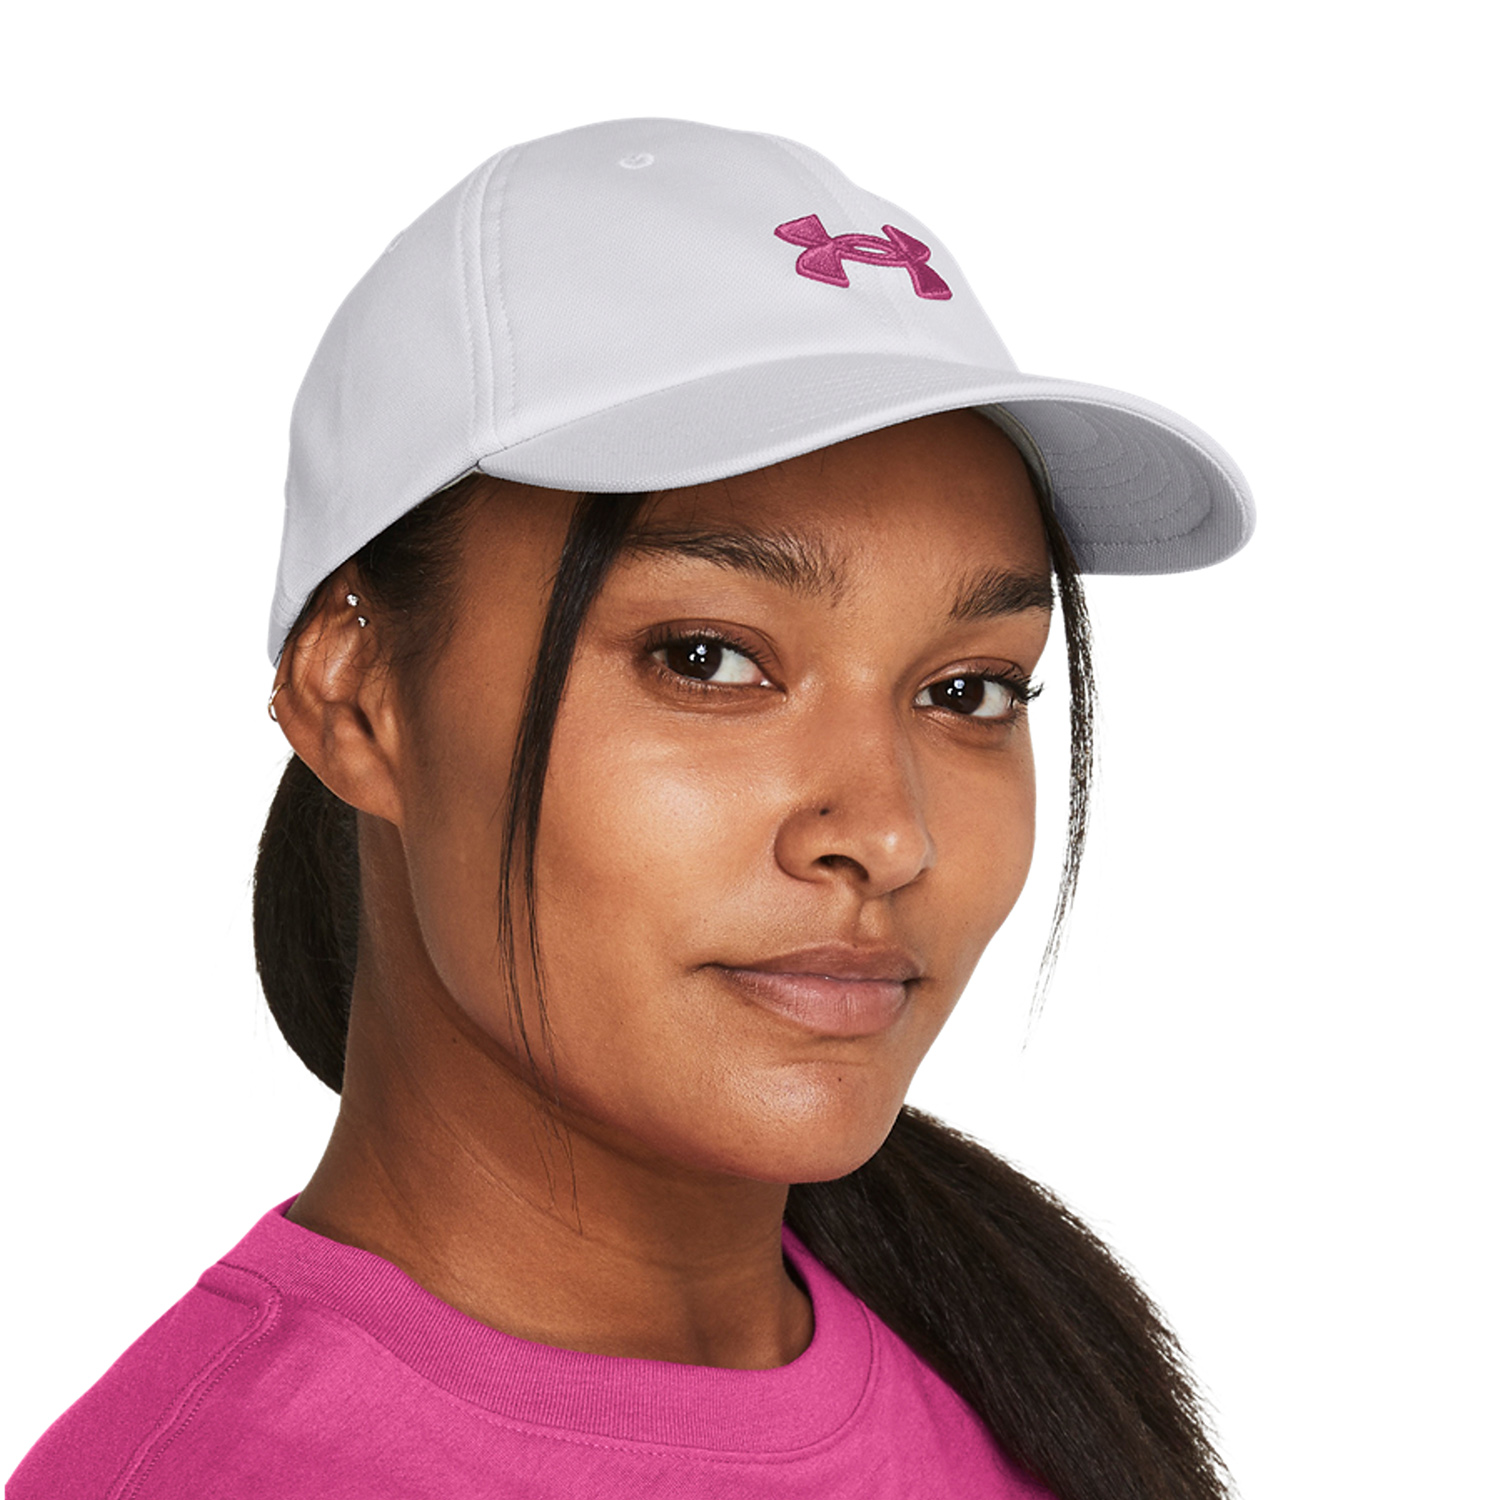 Under Armour Blitzing Cap Woman - Halo Gray/Astro Pink